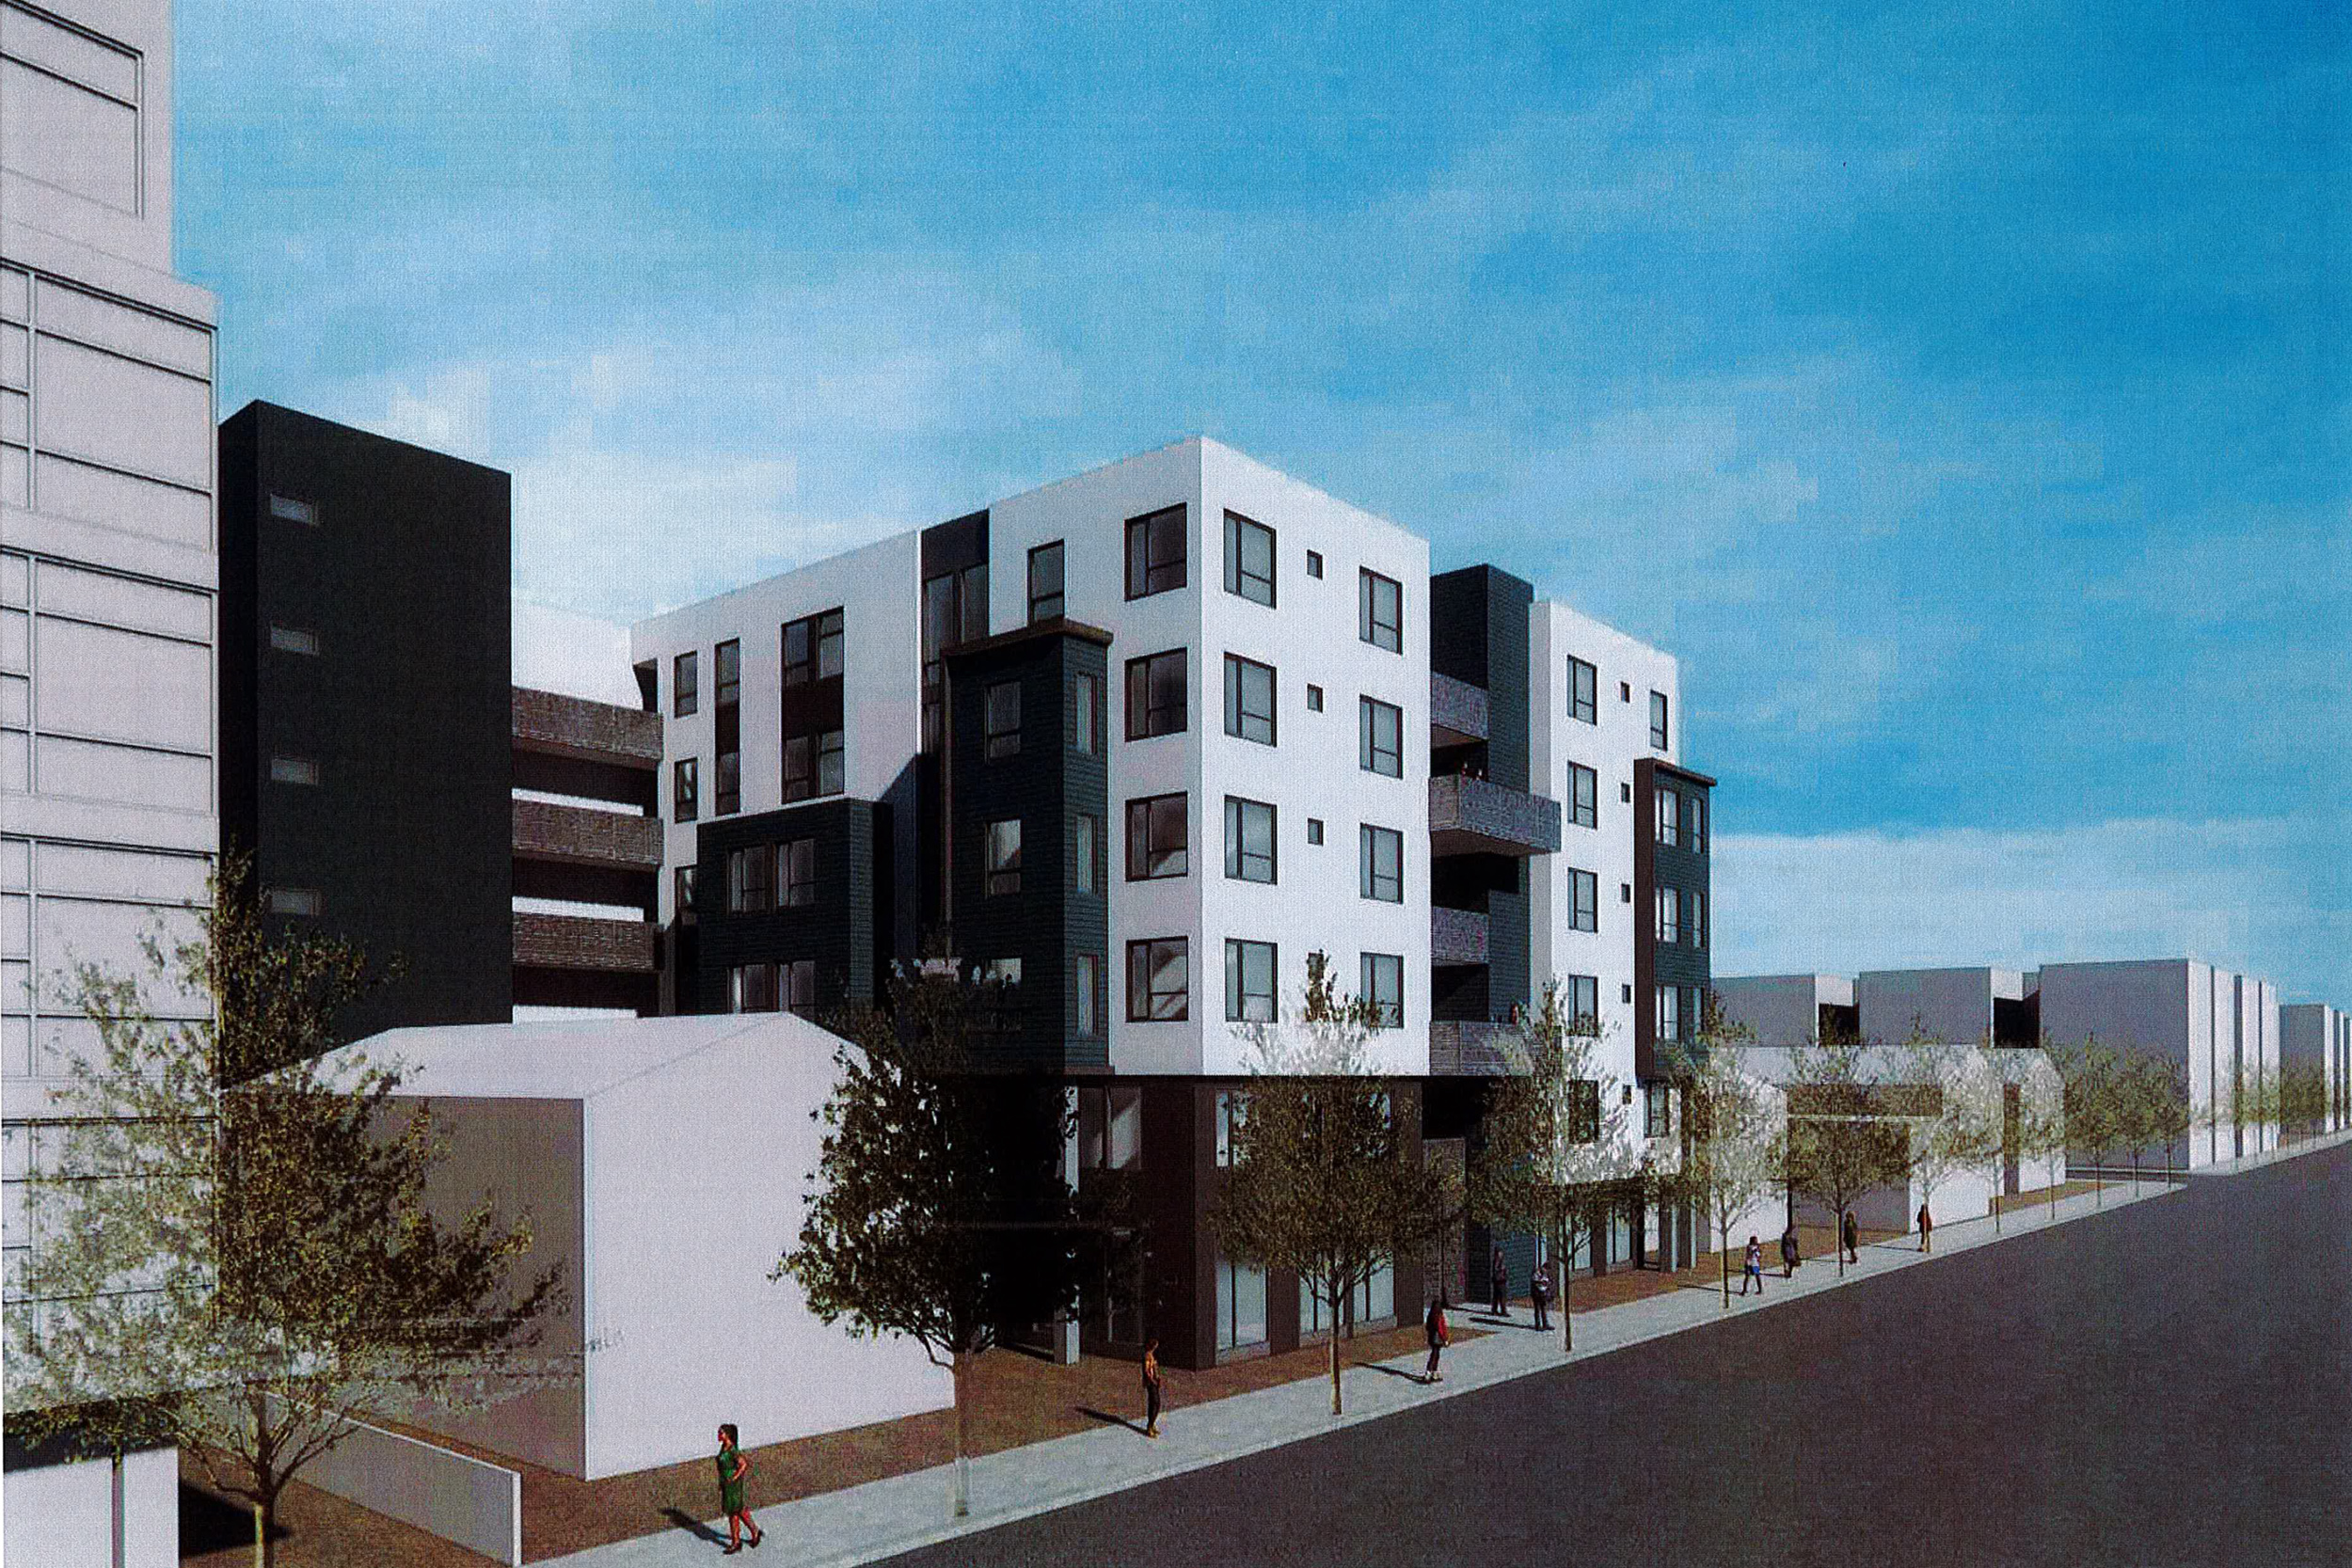 2127 Dwight Way aerial view from Shattuck Avenue, rendering by Levy Design Partners